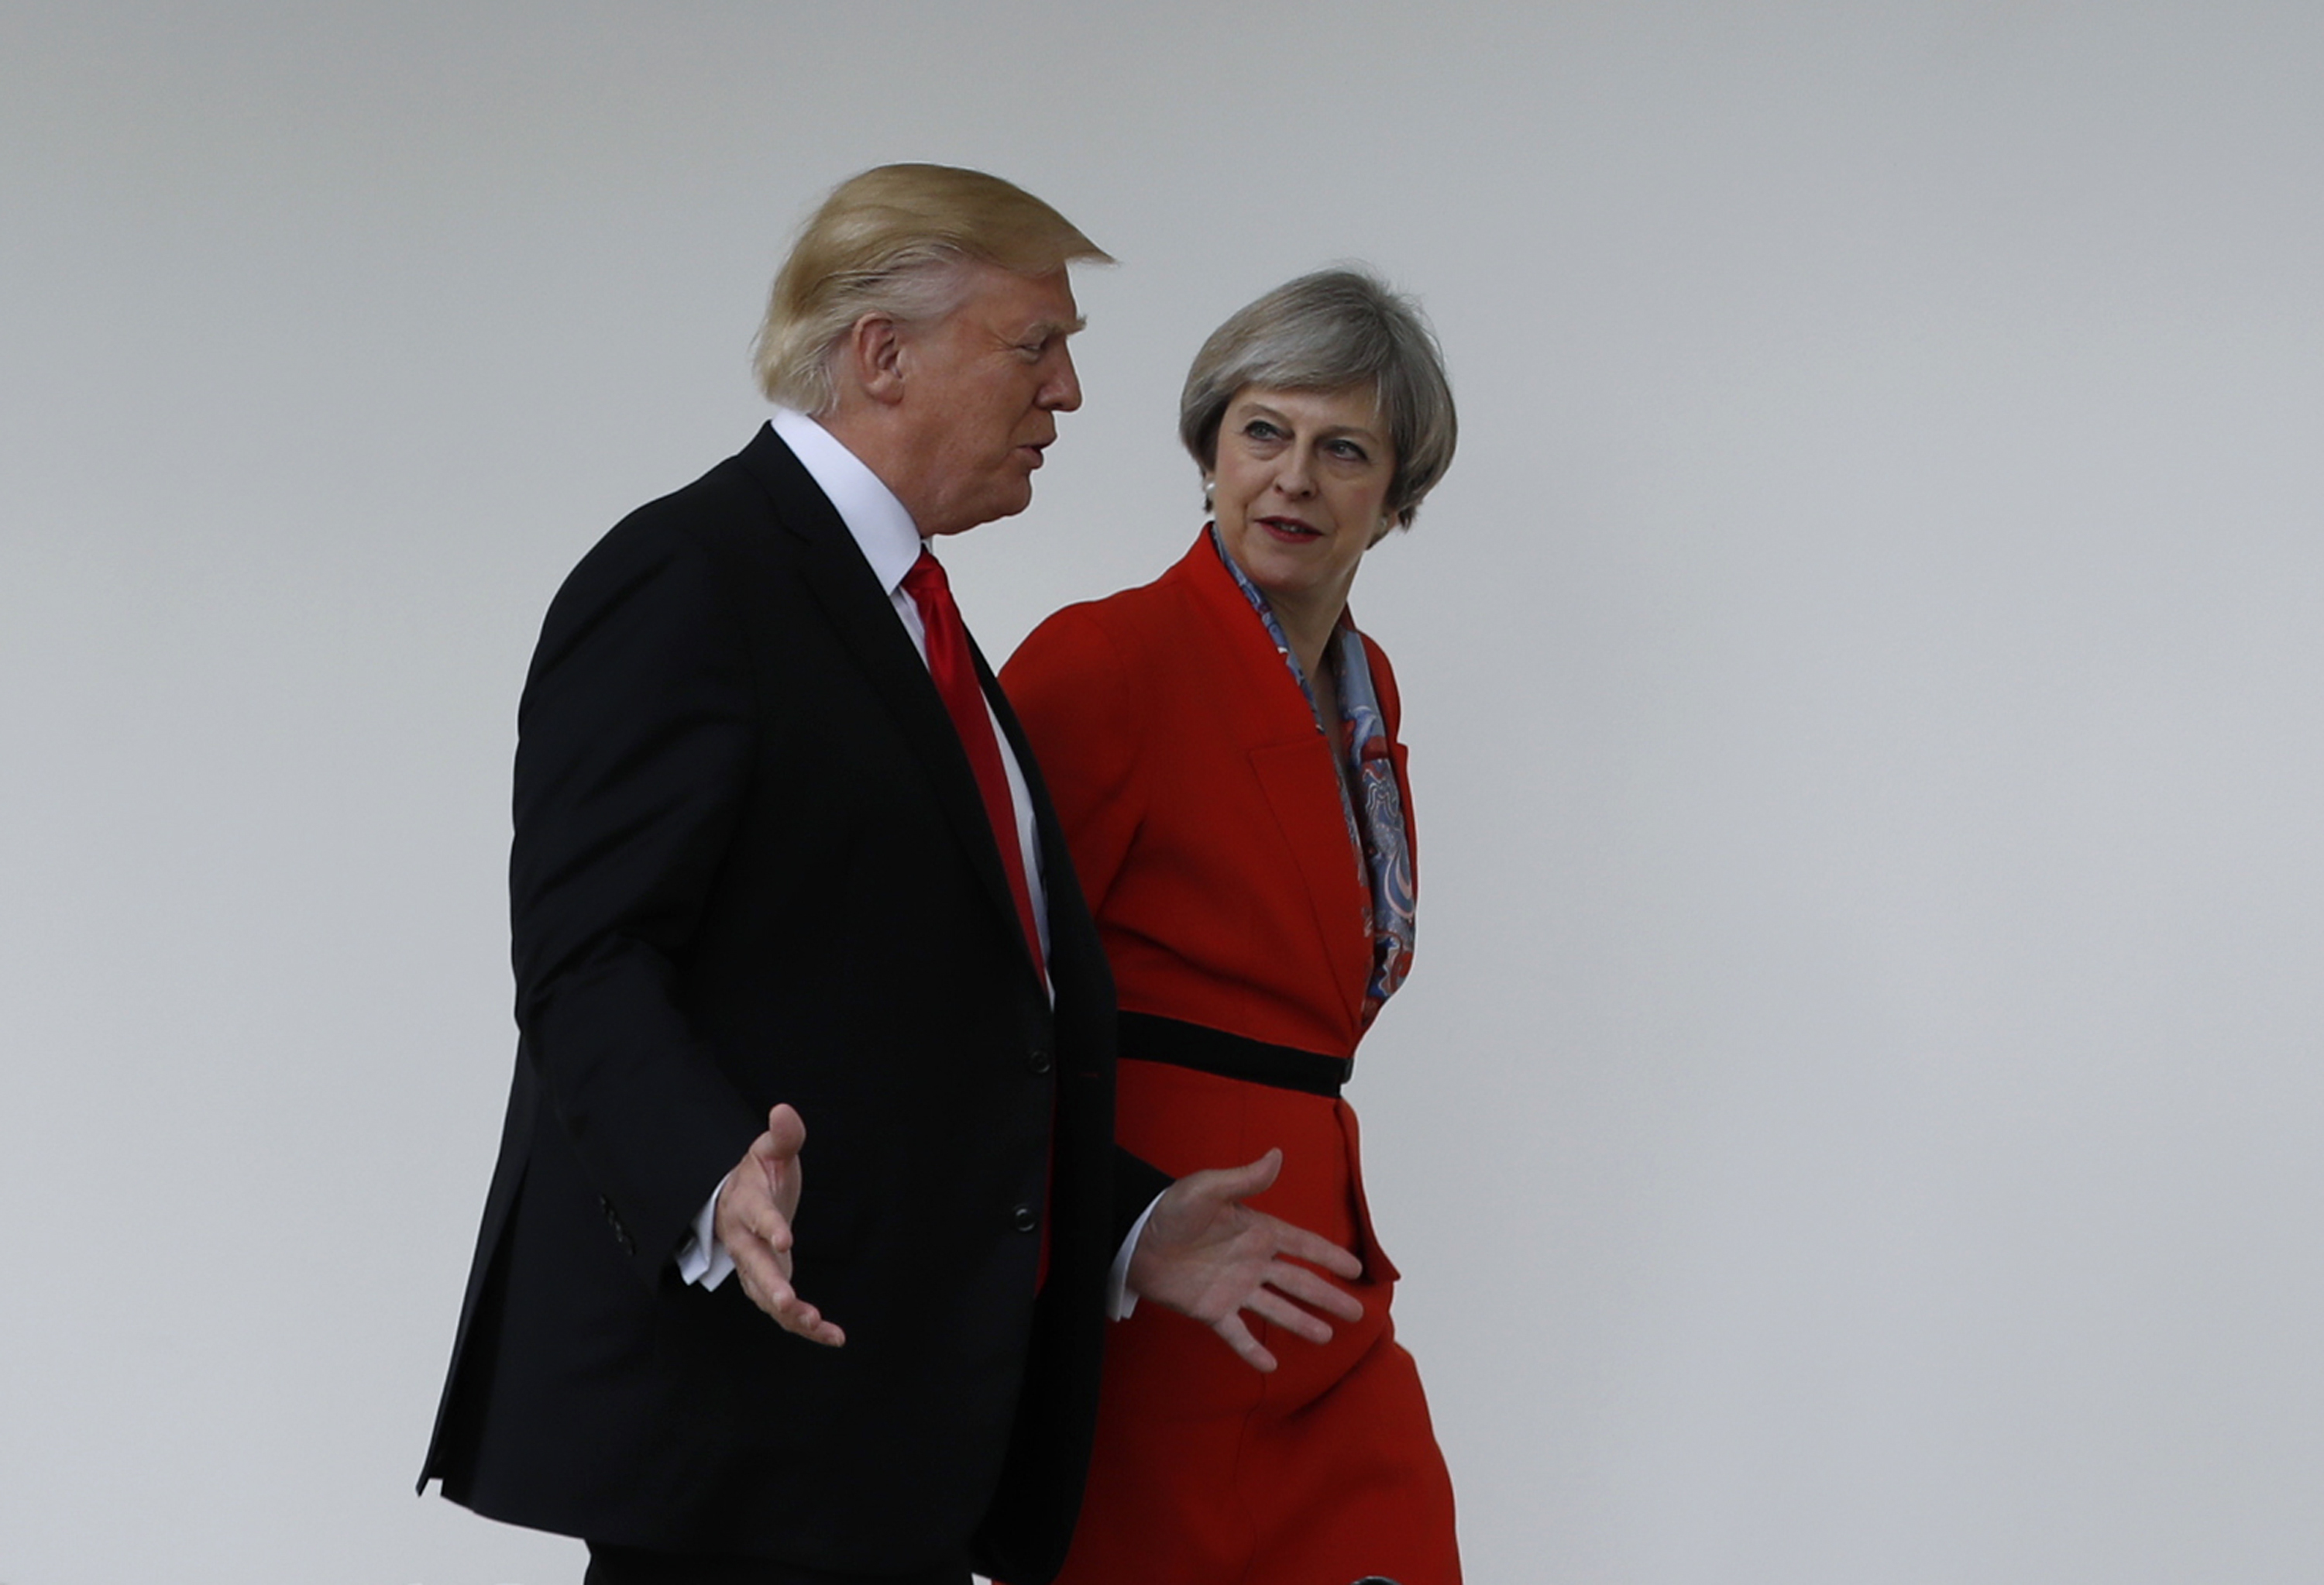 FILE - In this file photo dated Friday, Jan. 27, 2017, US President Donald Trump and Britain's Prime Minister Theresa May walk along the colonnades of the White House in Washington.  British lawmakers are set to hold a debate on Monday in London to consider a call for U.S. President Donald Trump to be denied an official state visit to the U.K., but the Conservative government insists the invitation remains firmly in place.